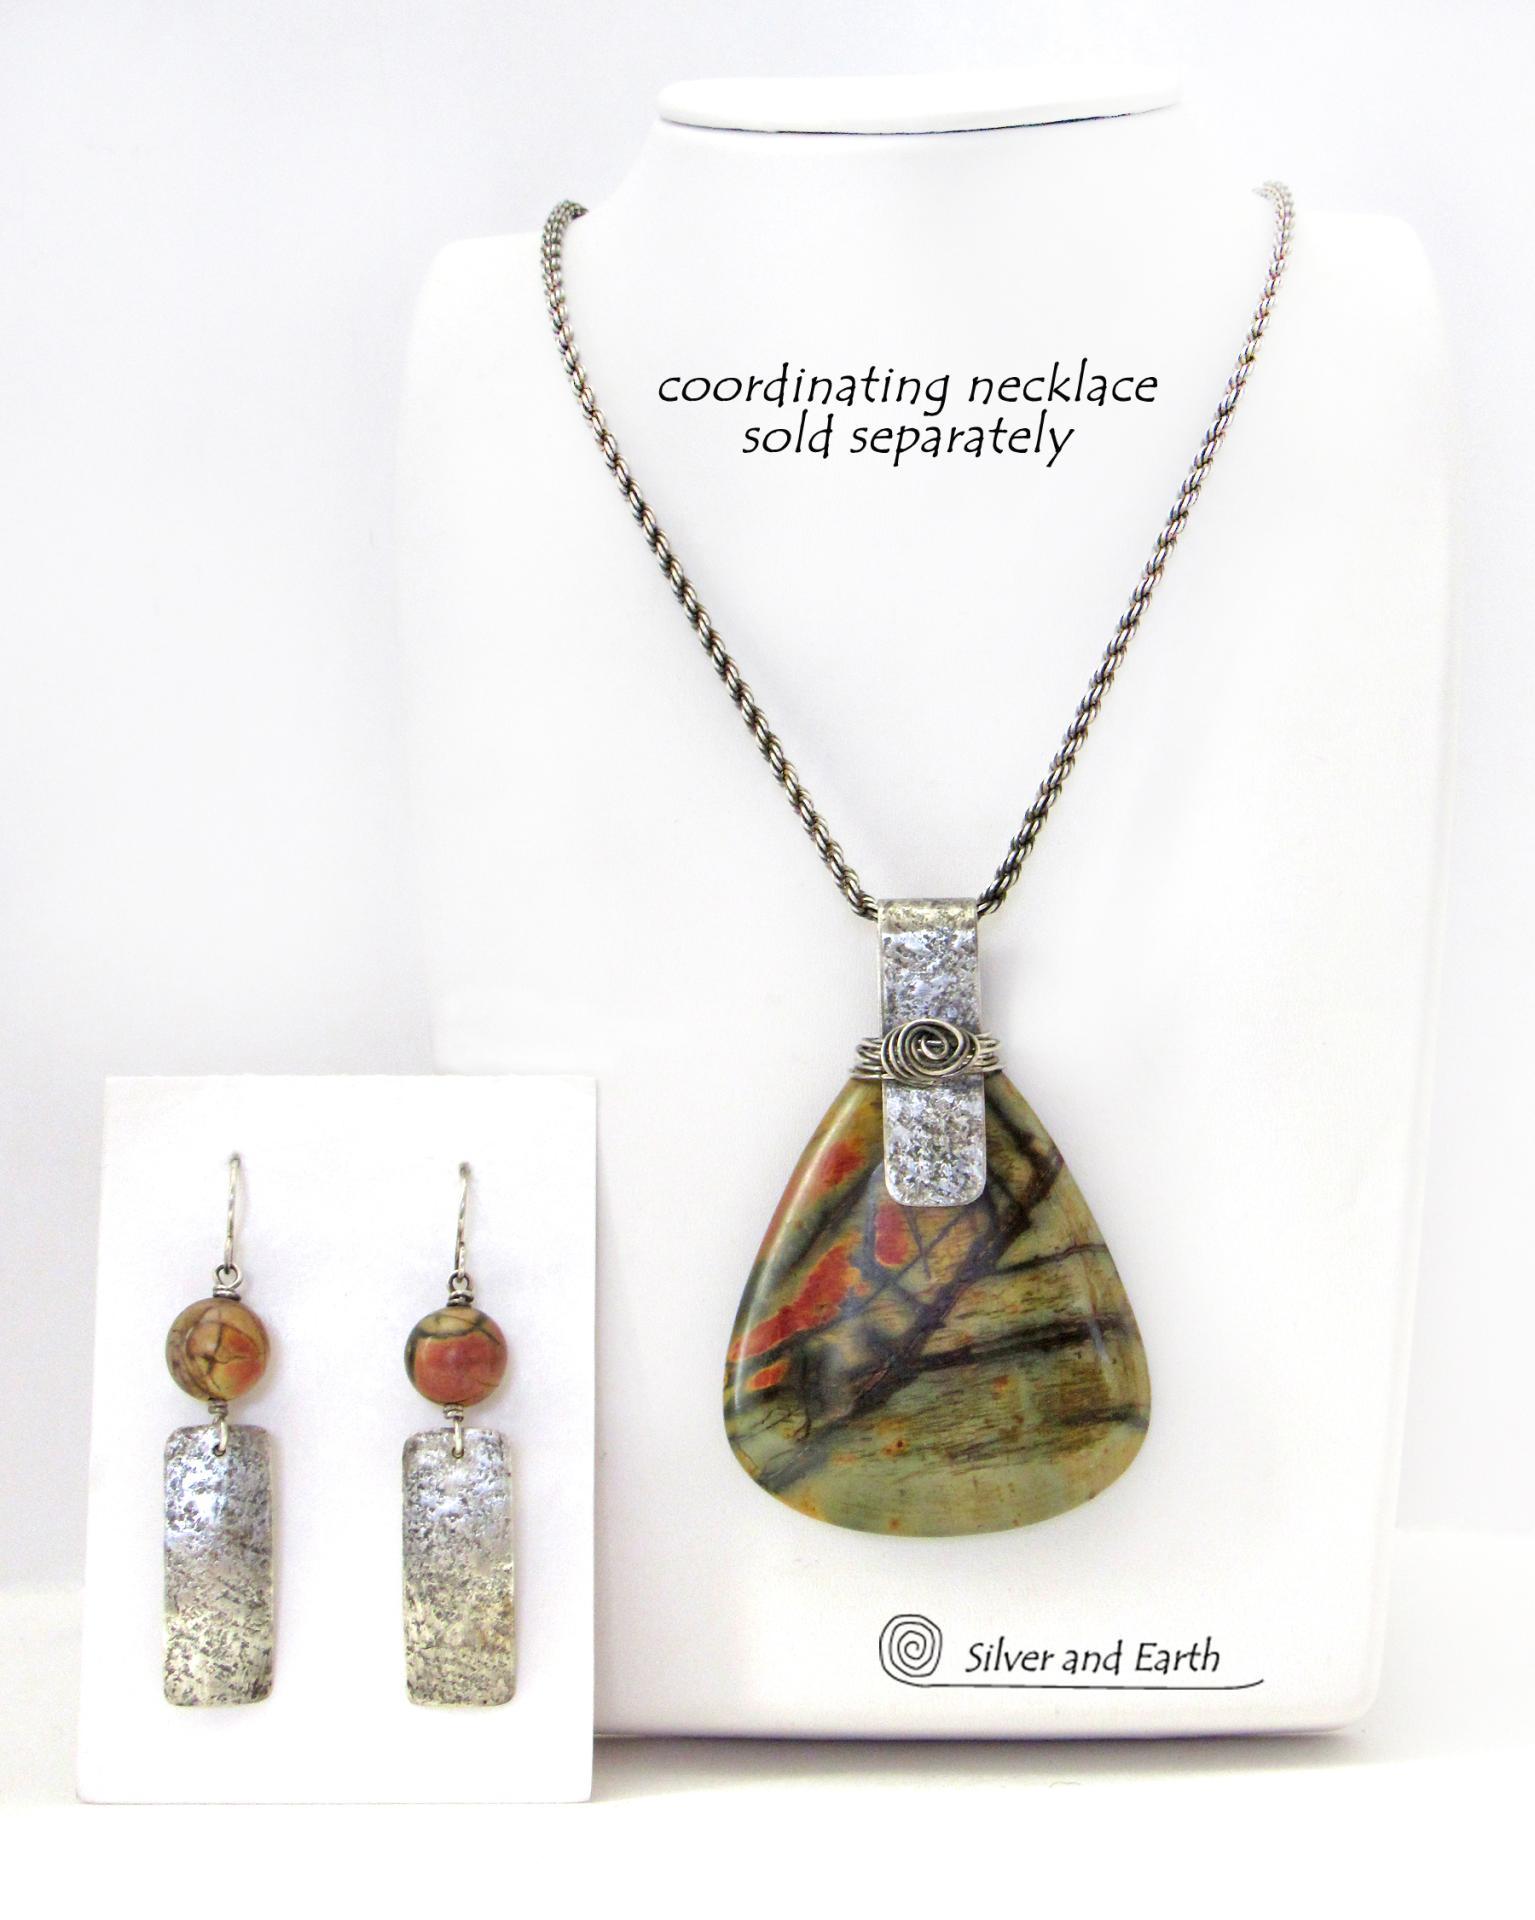 Sterling Silver Earrings with Red Creek Jasper Stones - Earthy Natural Stone Jewelry